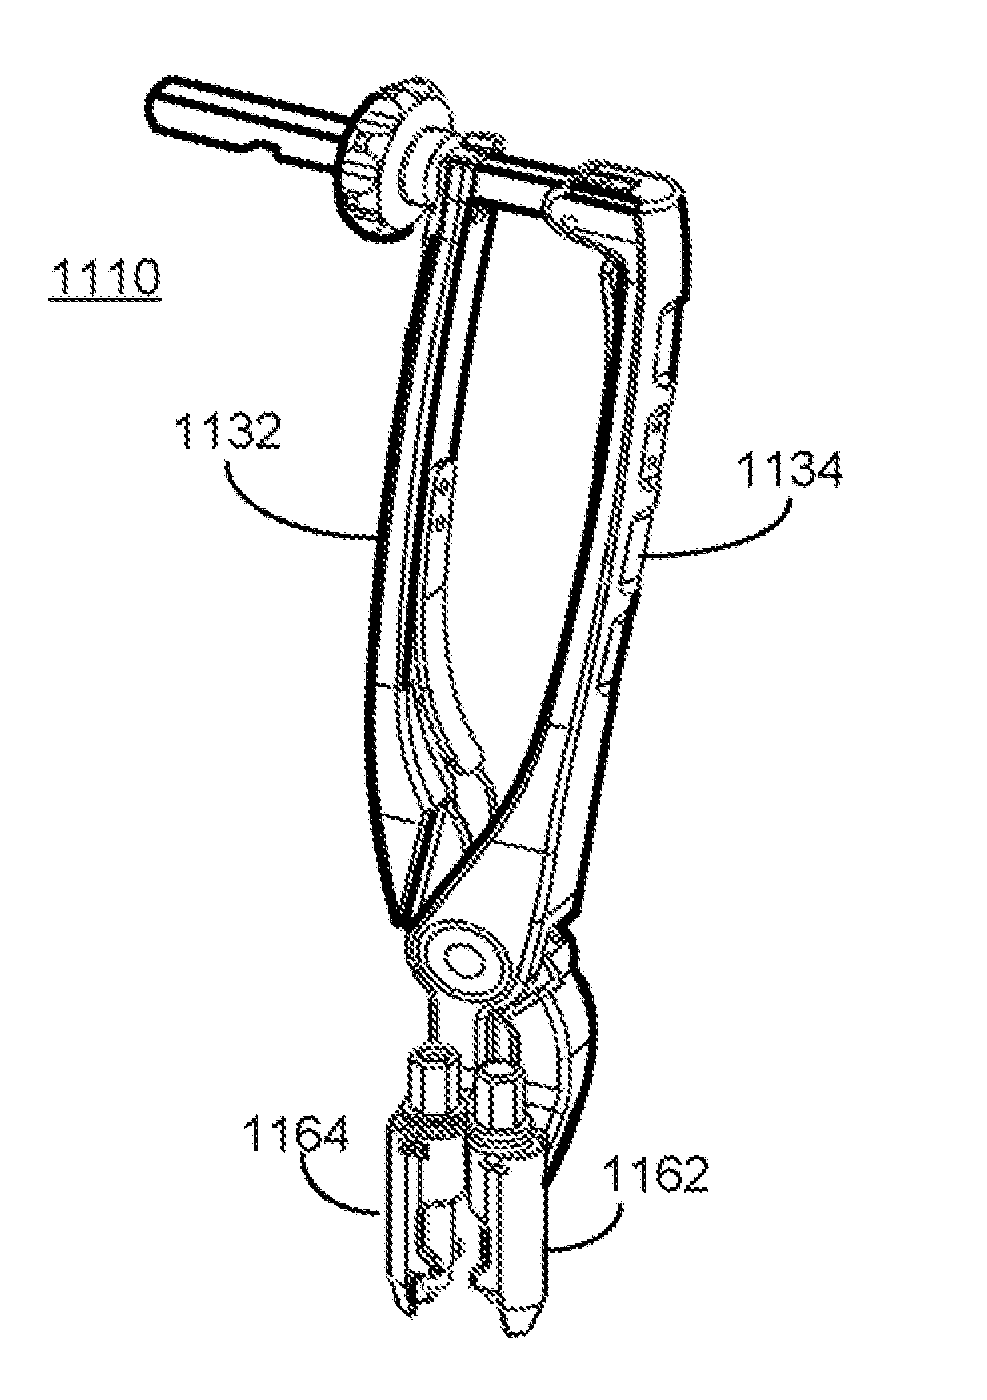 Implantation Tools for Interspinous Process Spacing Device